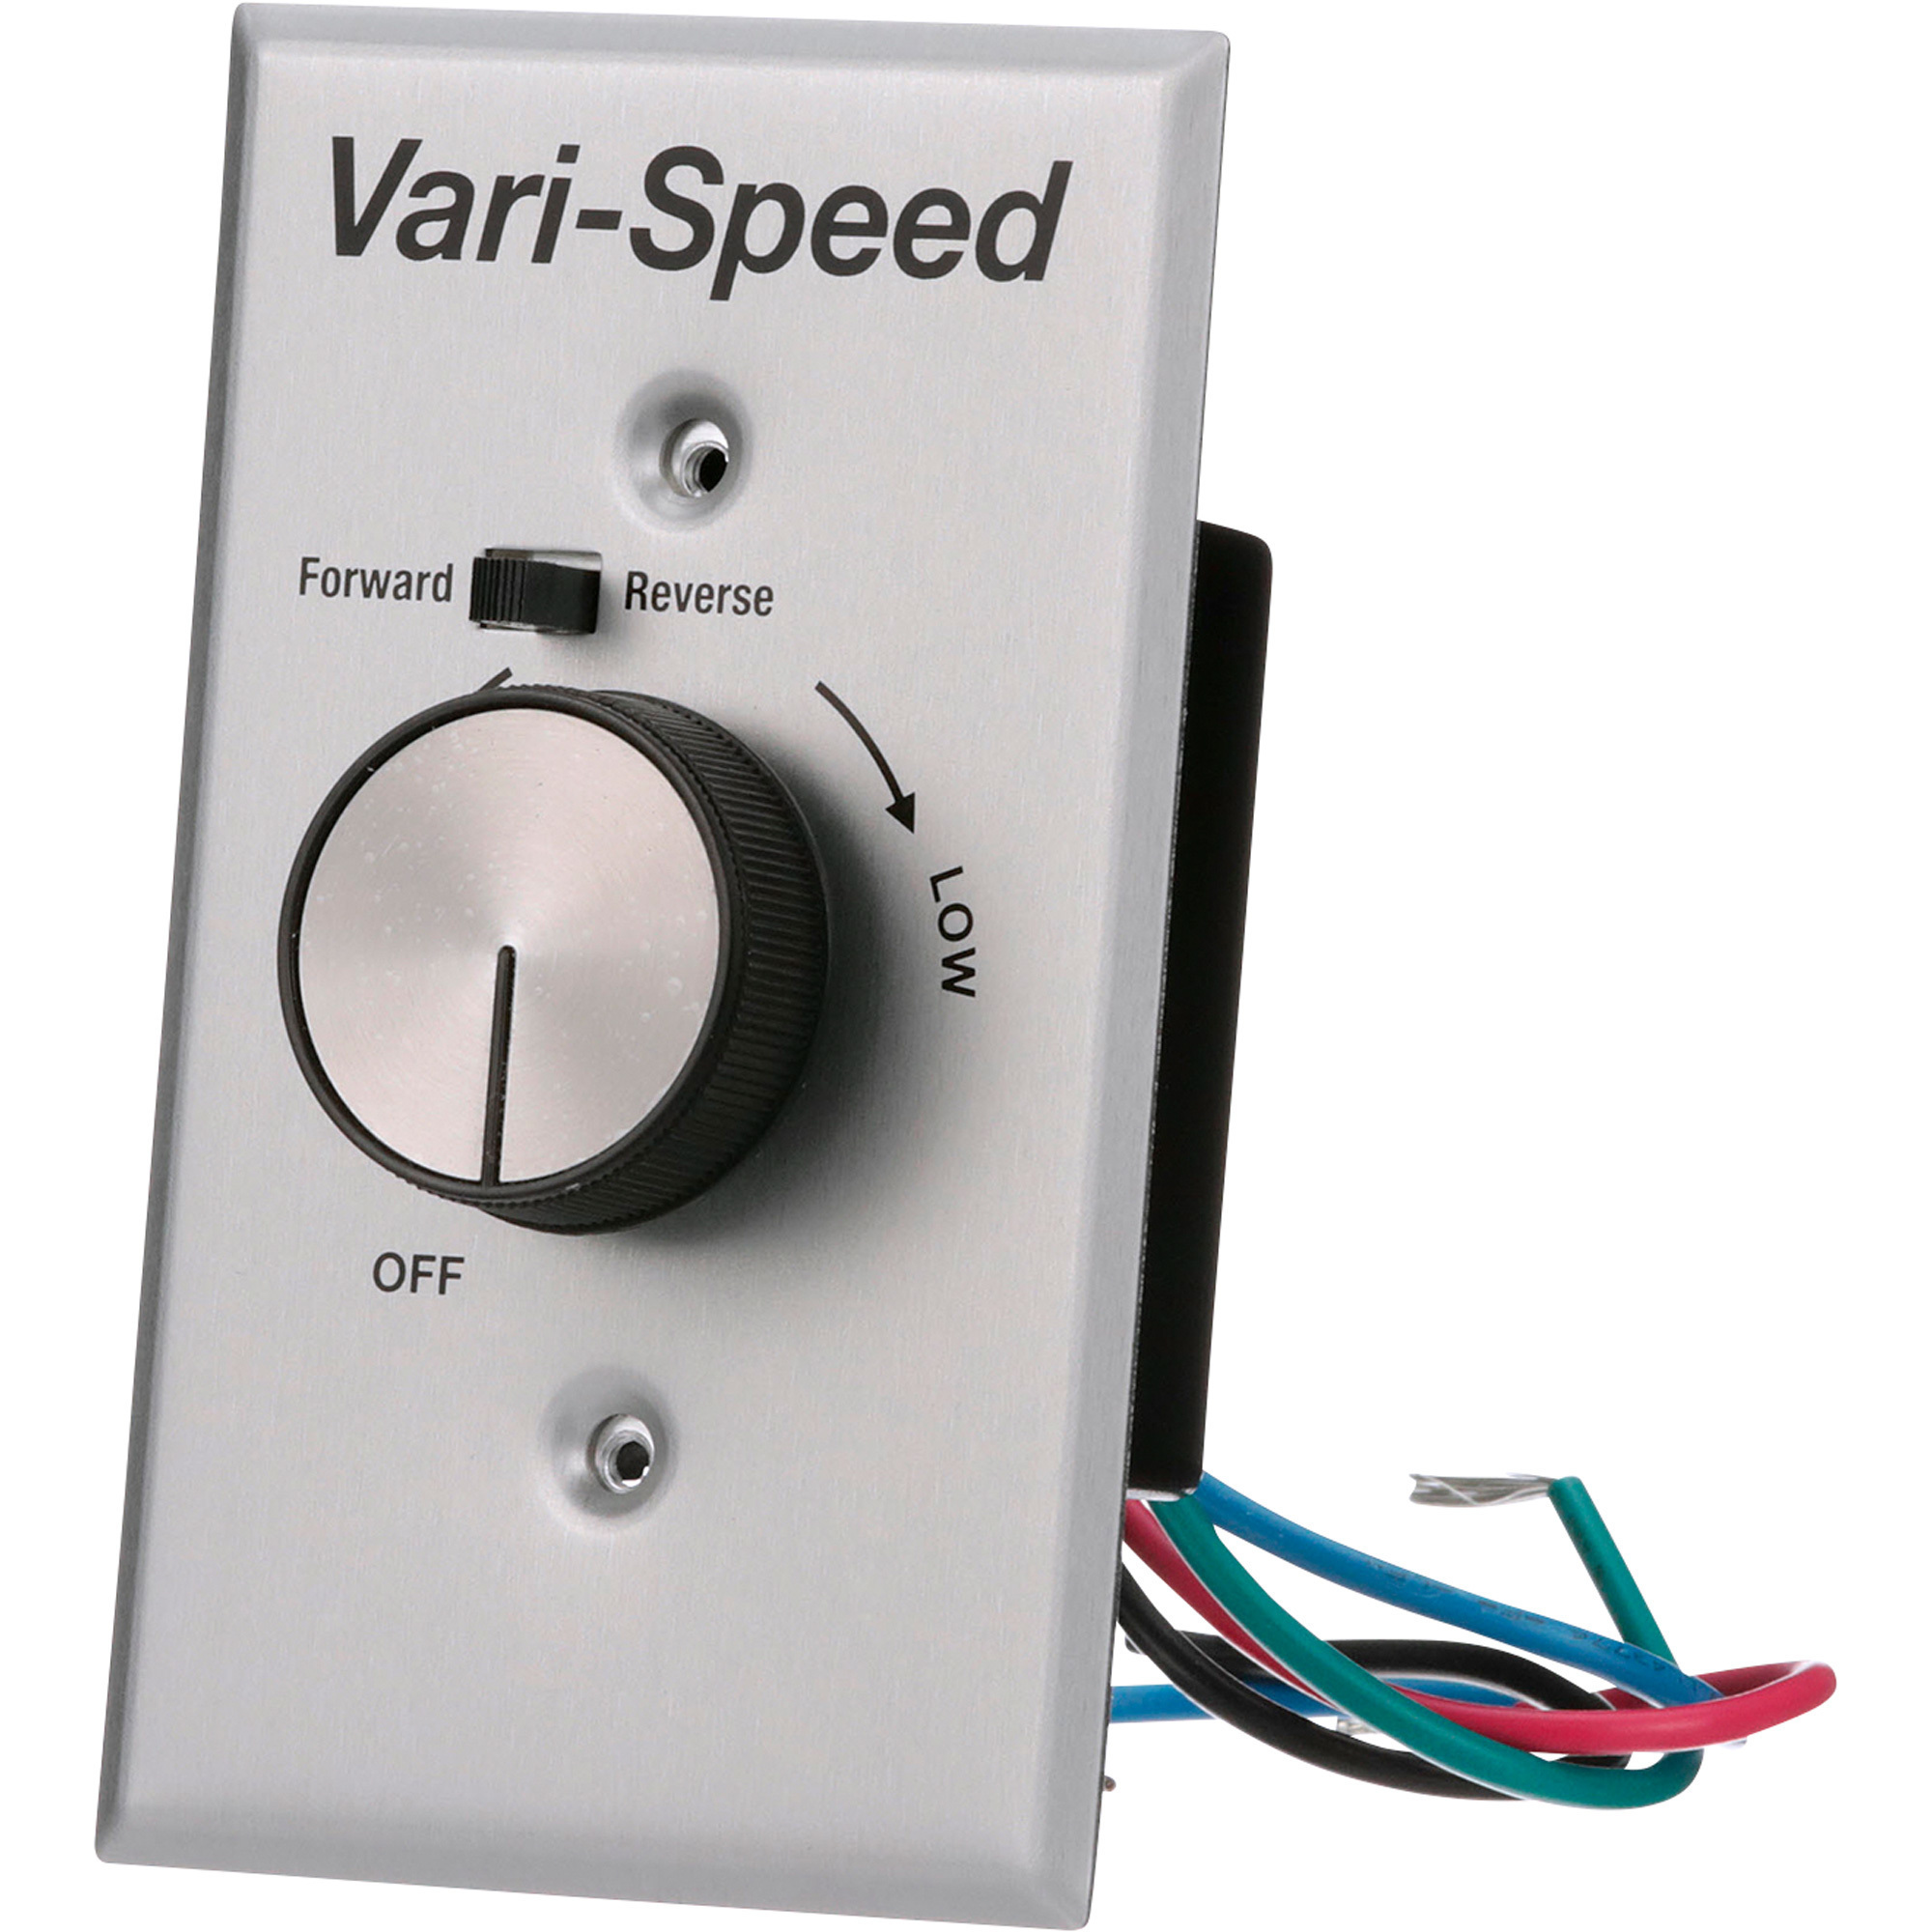 TPI Ceiling Fan Speed Controller — 120 Volts, Reversible, Controls Up to 5 Fans, Model KBWC-15SK -  08666802